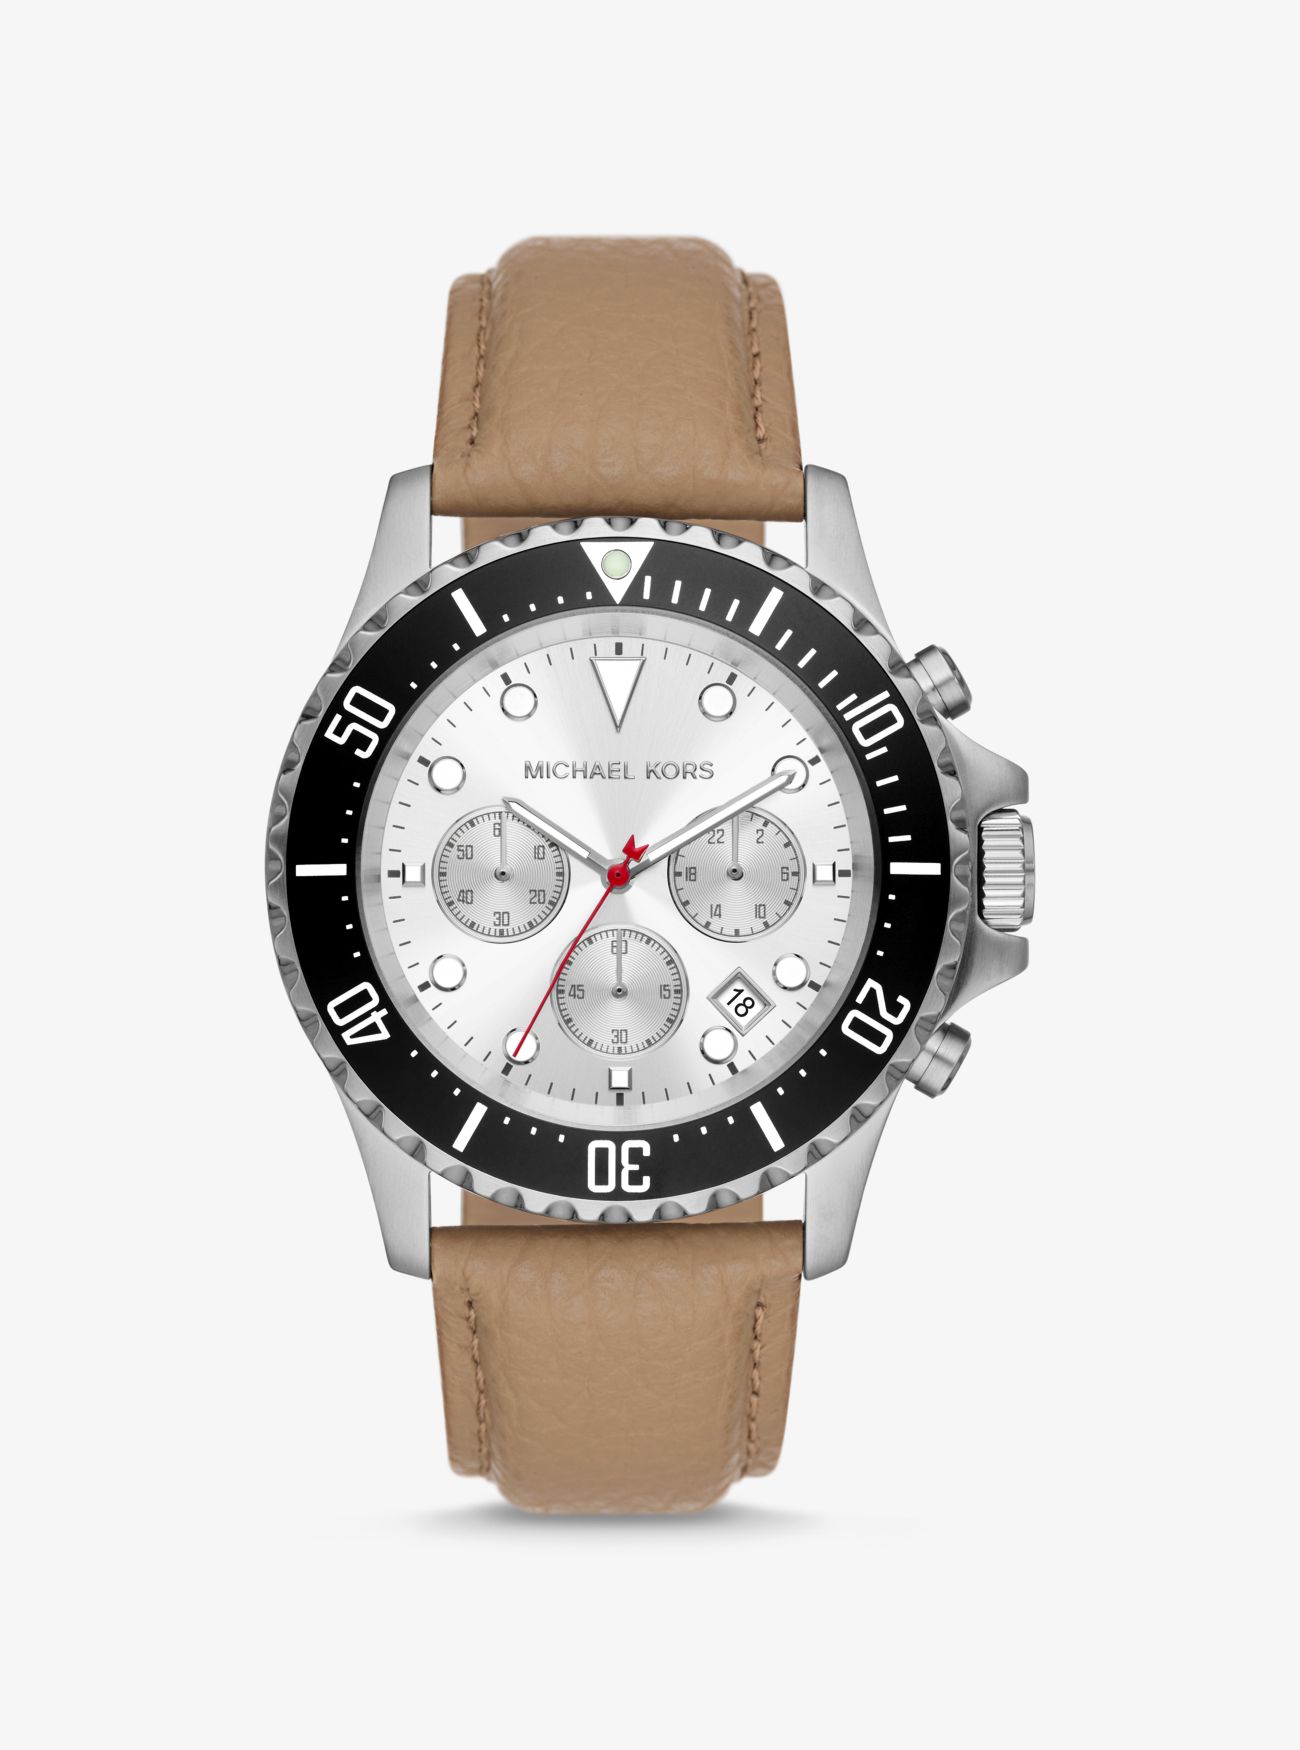 MK Oversized Everest Silver-Tone and Leather Watch - Husk - Michael Kors